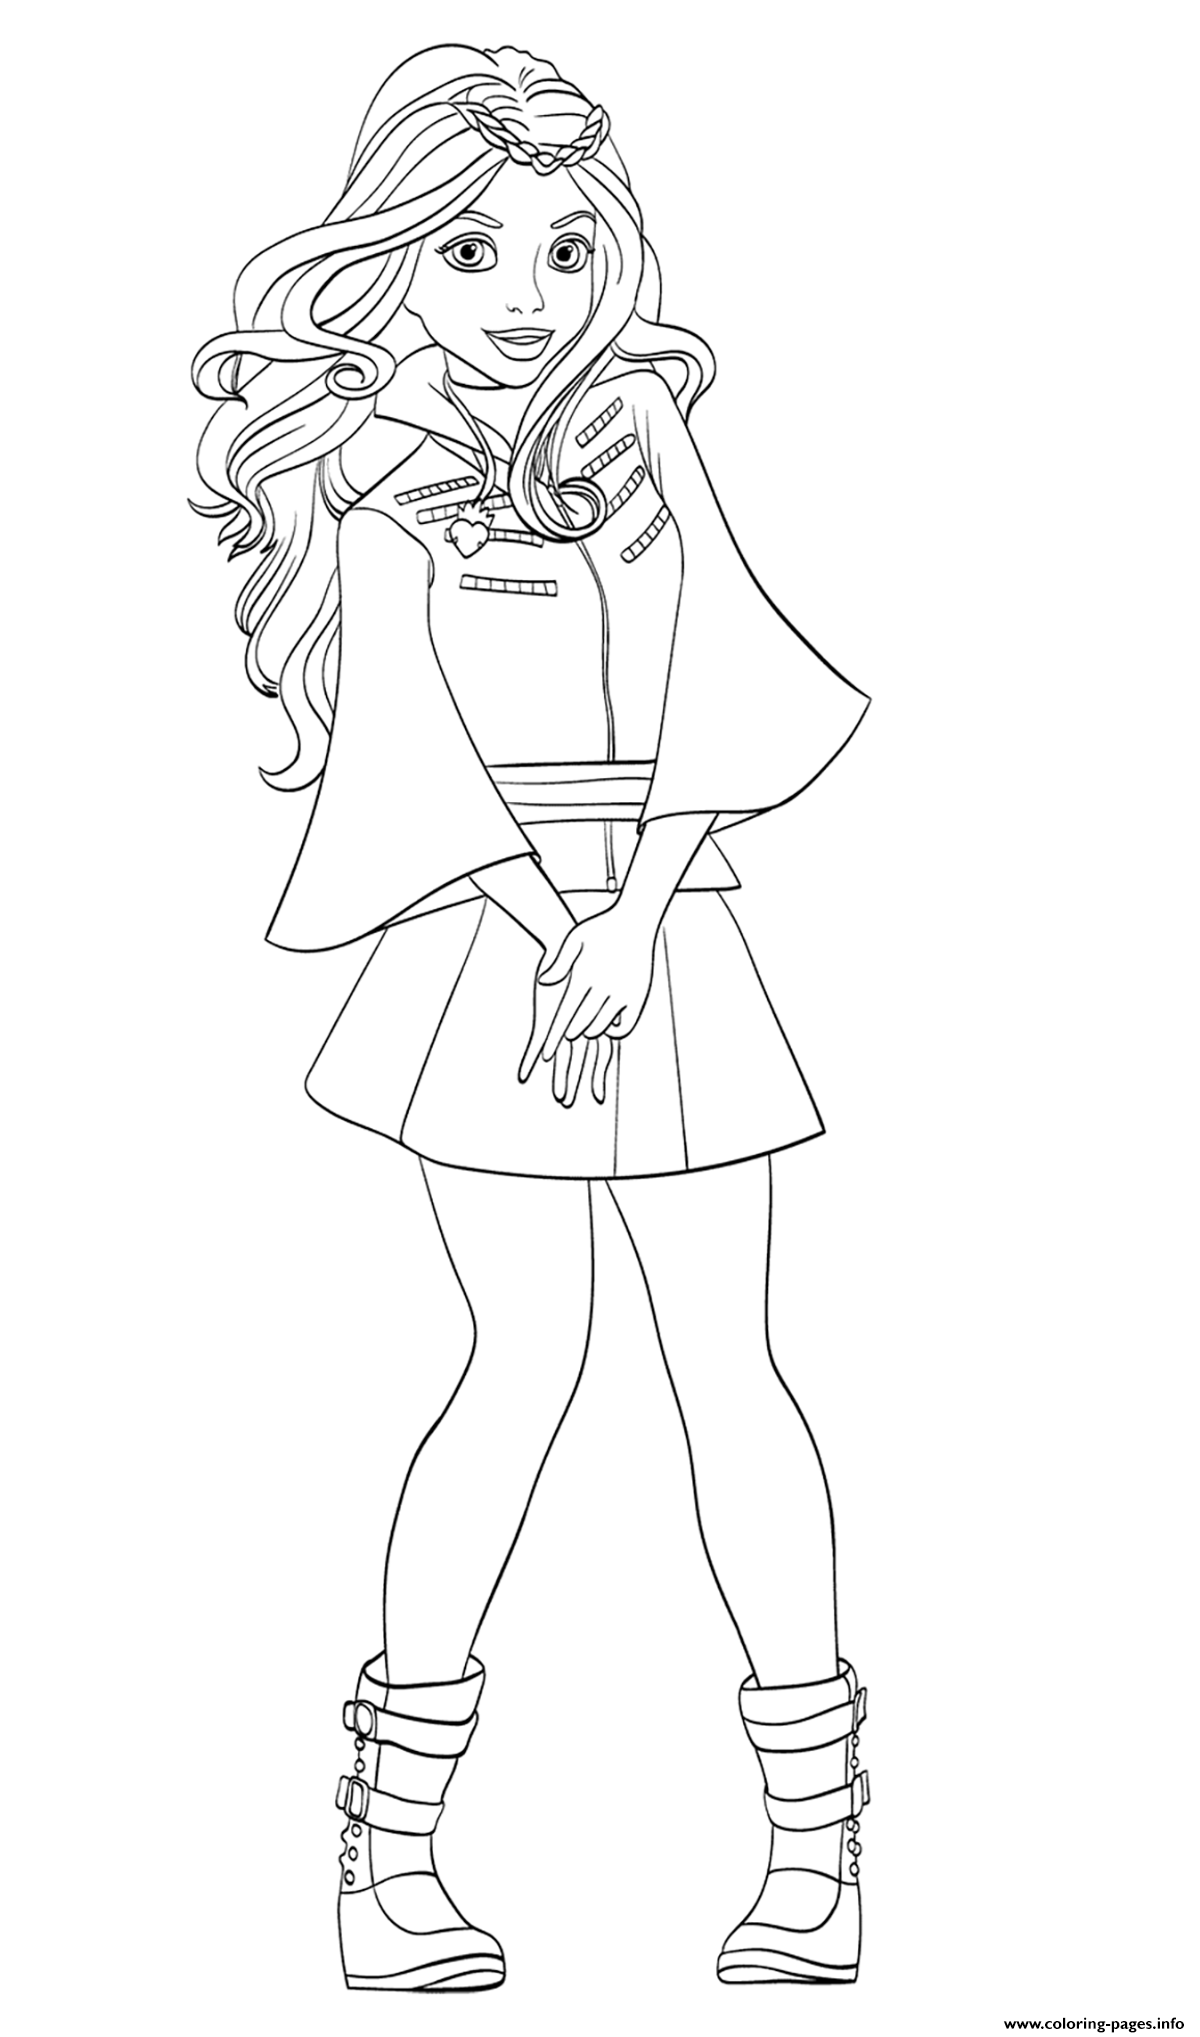 Descendants 2 Coloring Page New Mal From Descendants 2 Step by Step